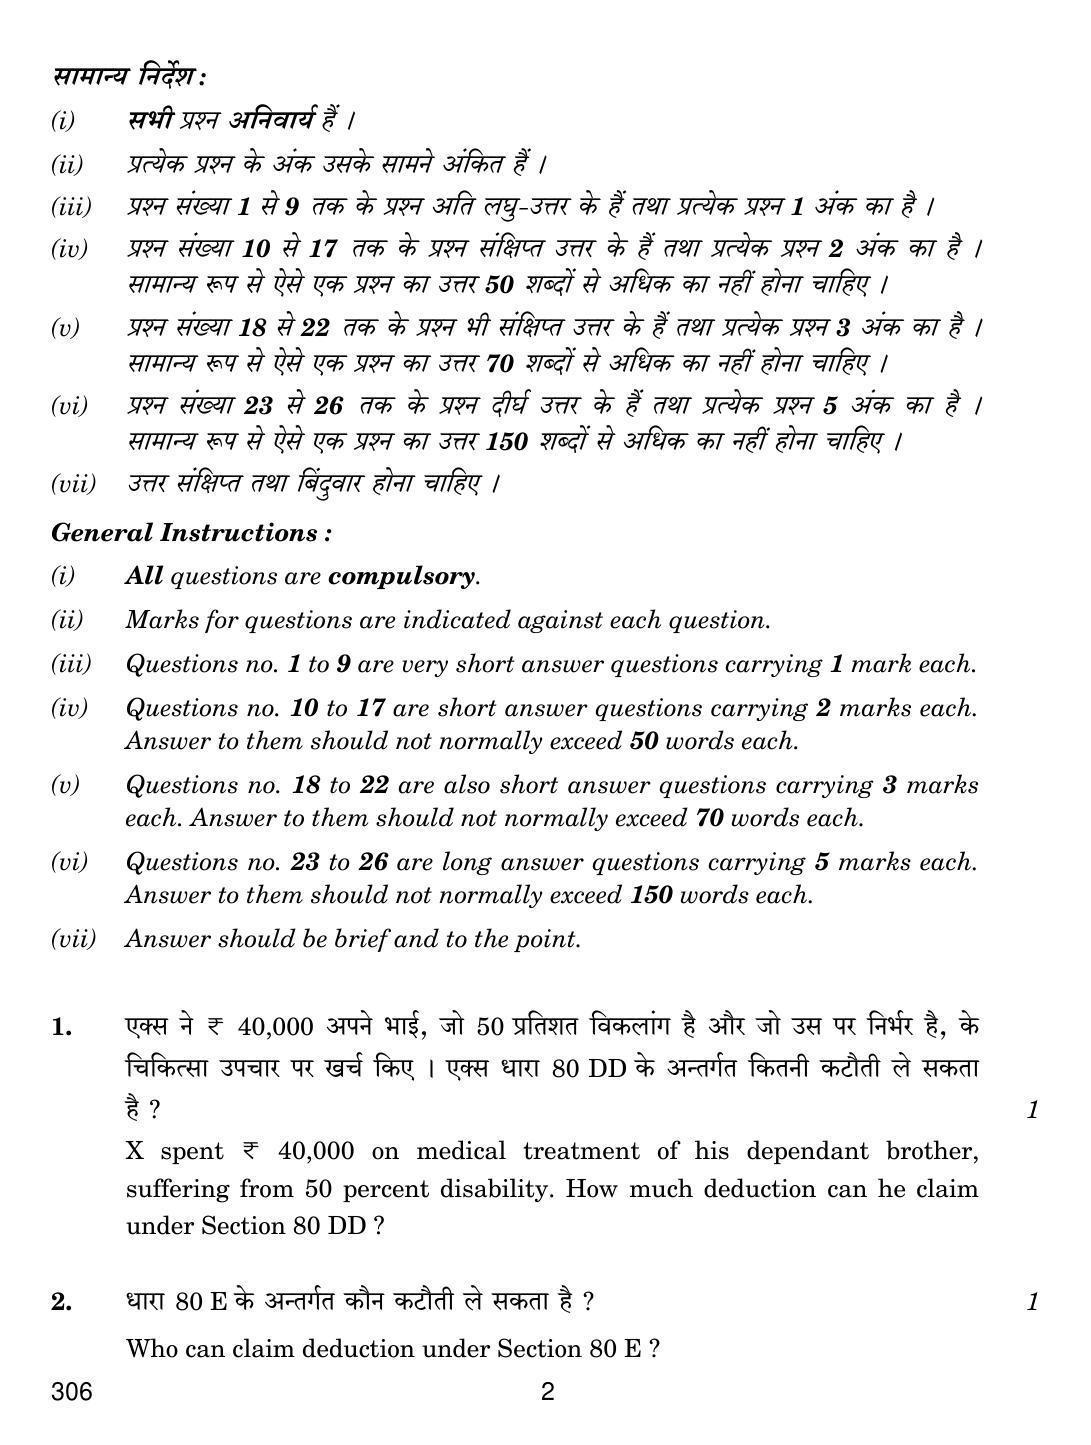 CBSE Class 12 306 TAXATION 2018 Question Paper - Page 2